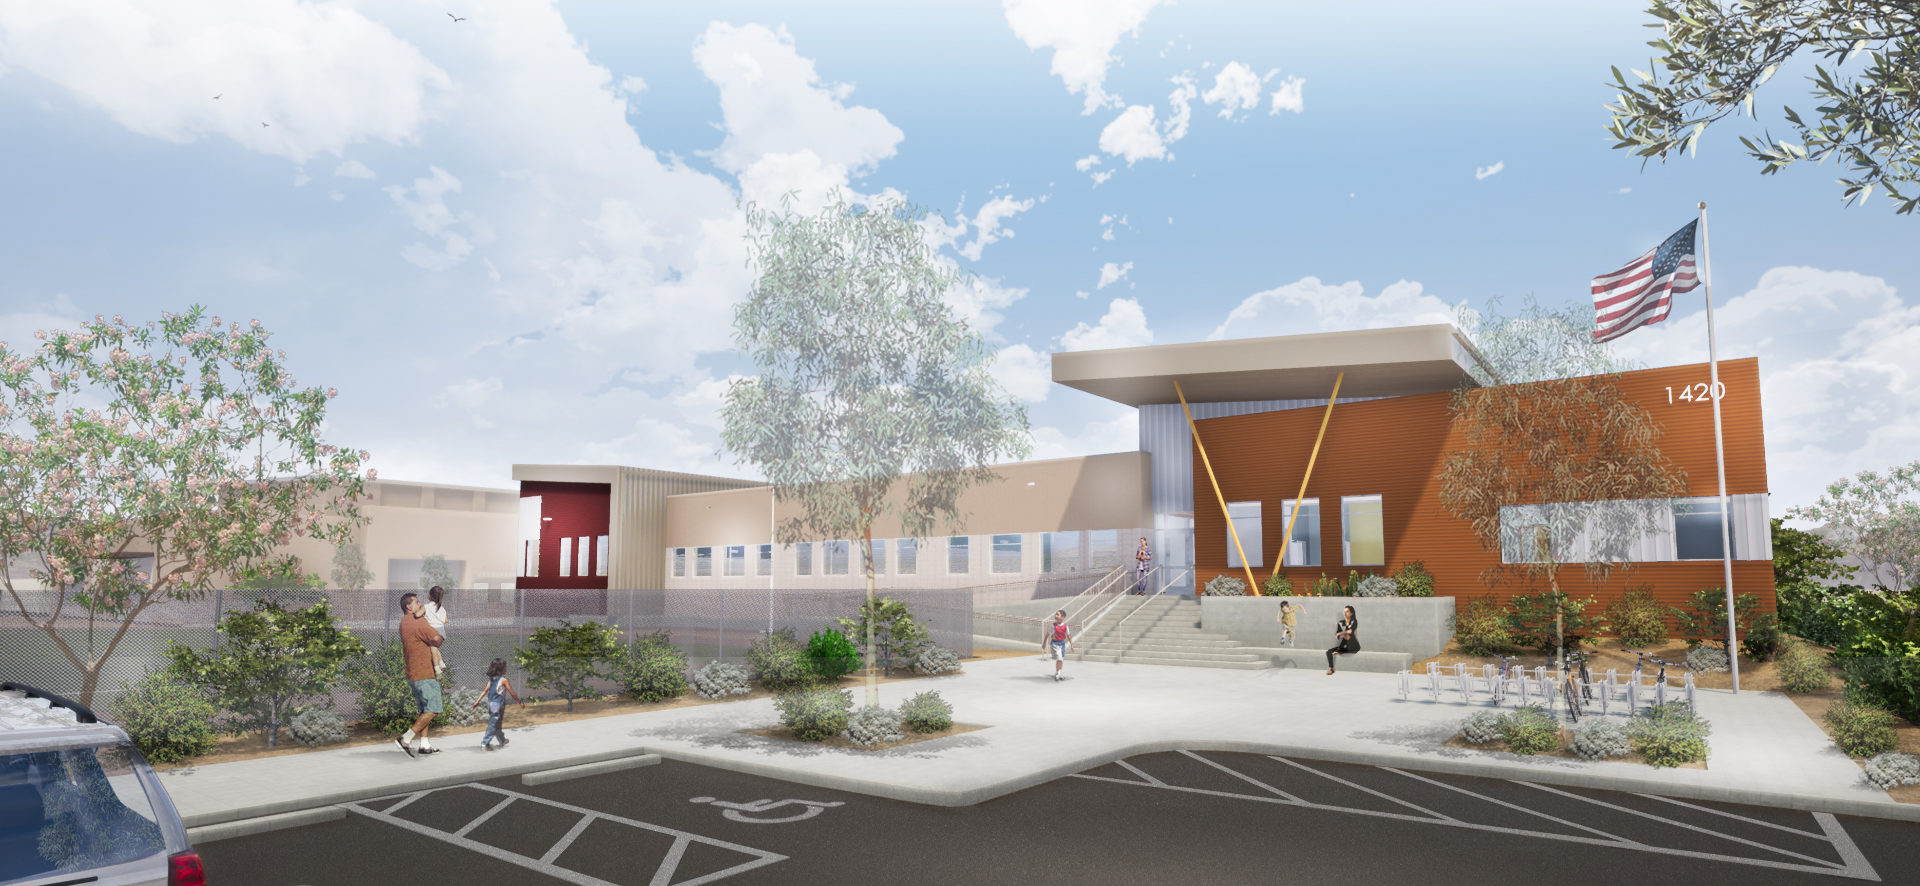 A rendering of the front exterior of the Sandy Valley School K-12 facility, designed by LGA Architecture.